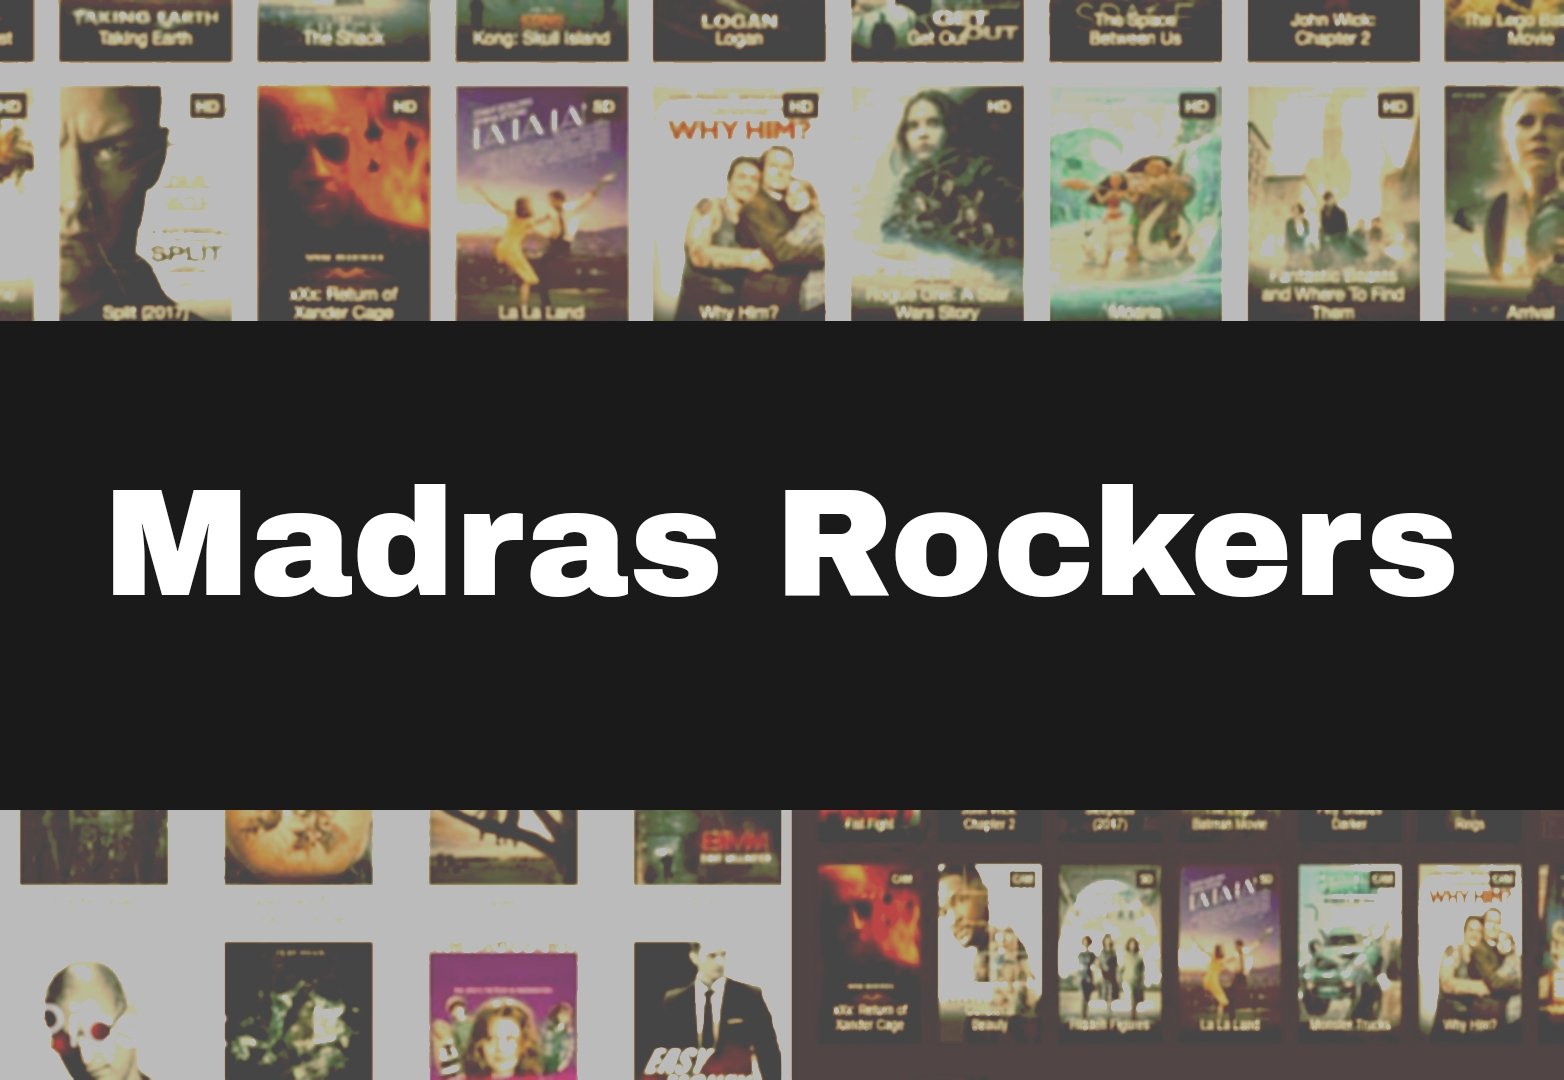 You are currently viewing MadrasRockers 2023 – Latest Tamil HD Movies Download Website, Madras Rockers.net, Madras rockers.in, Madras Rockers.com